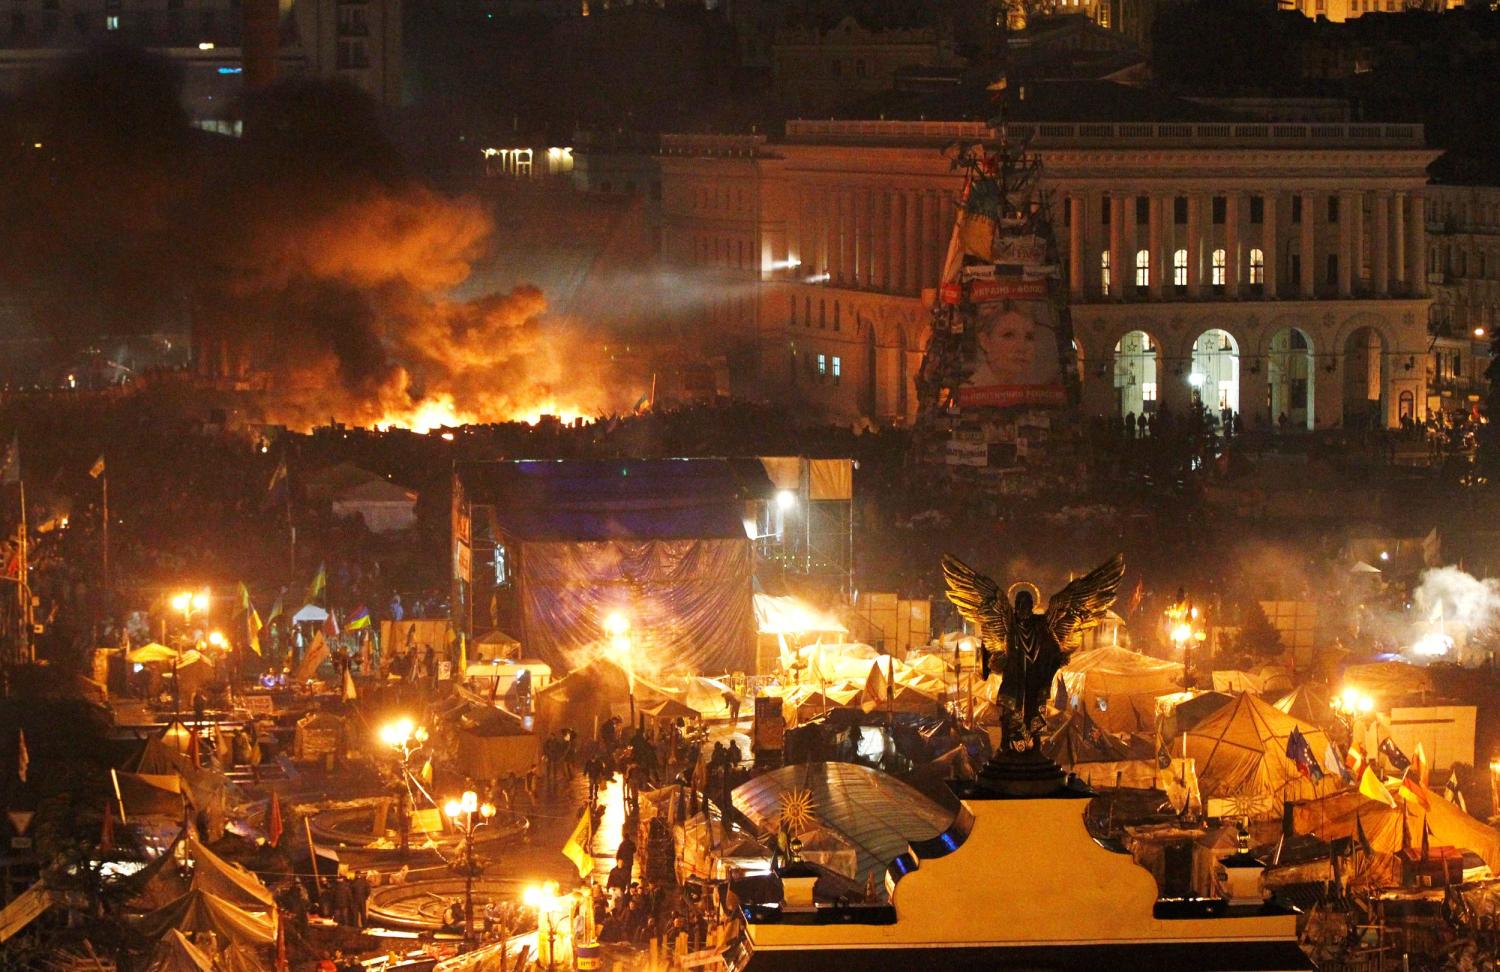 Smoke rises above burning barricades at Independence Square during anti-government protests in Kyiv, February 20, 2014.